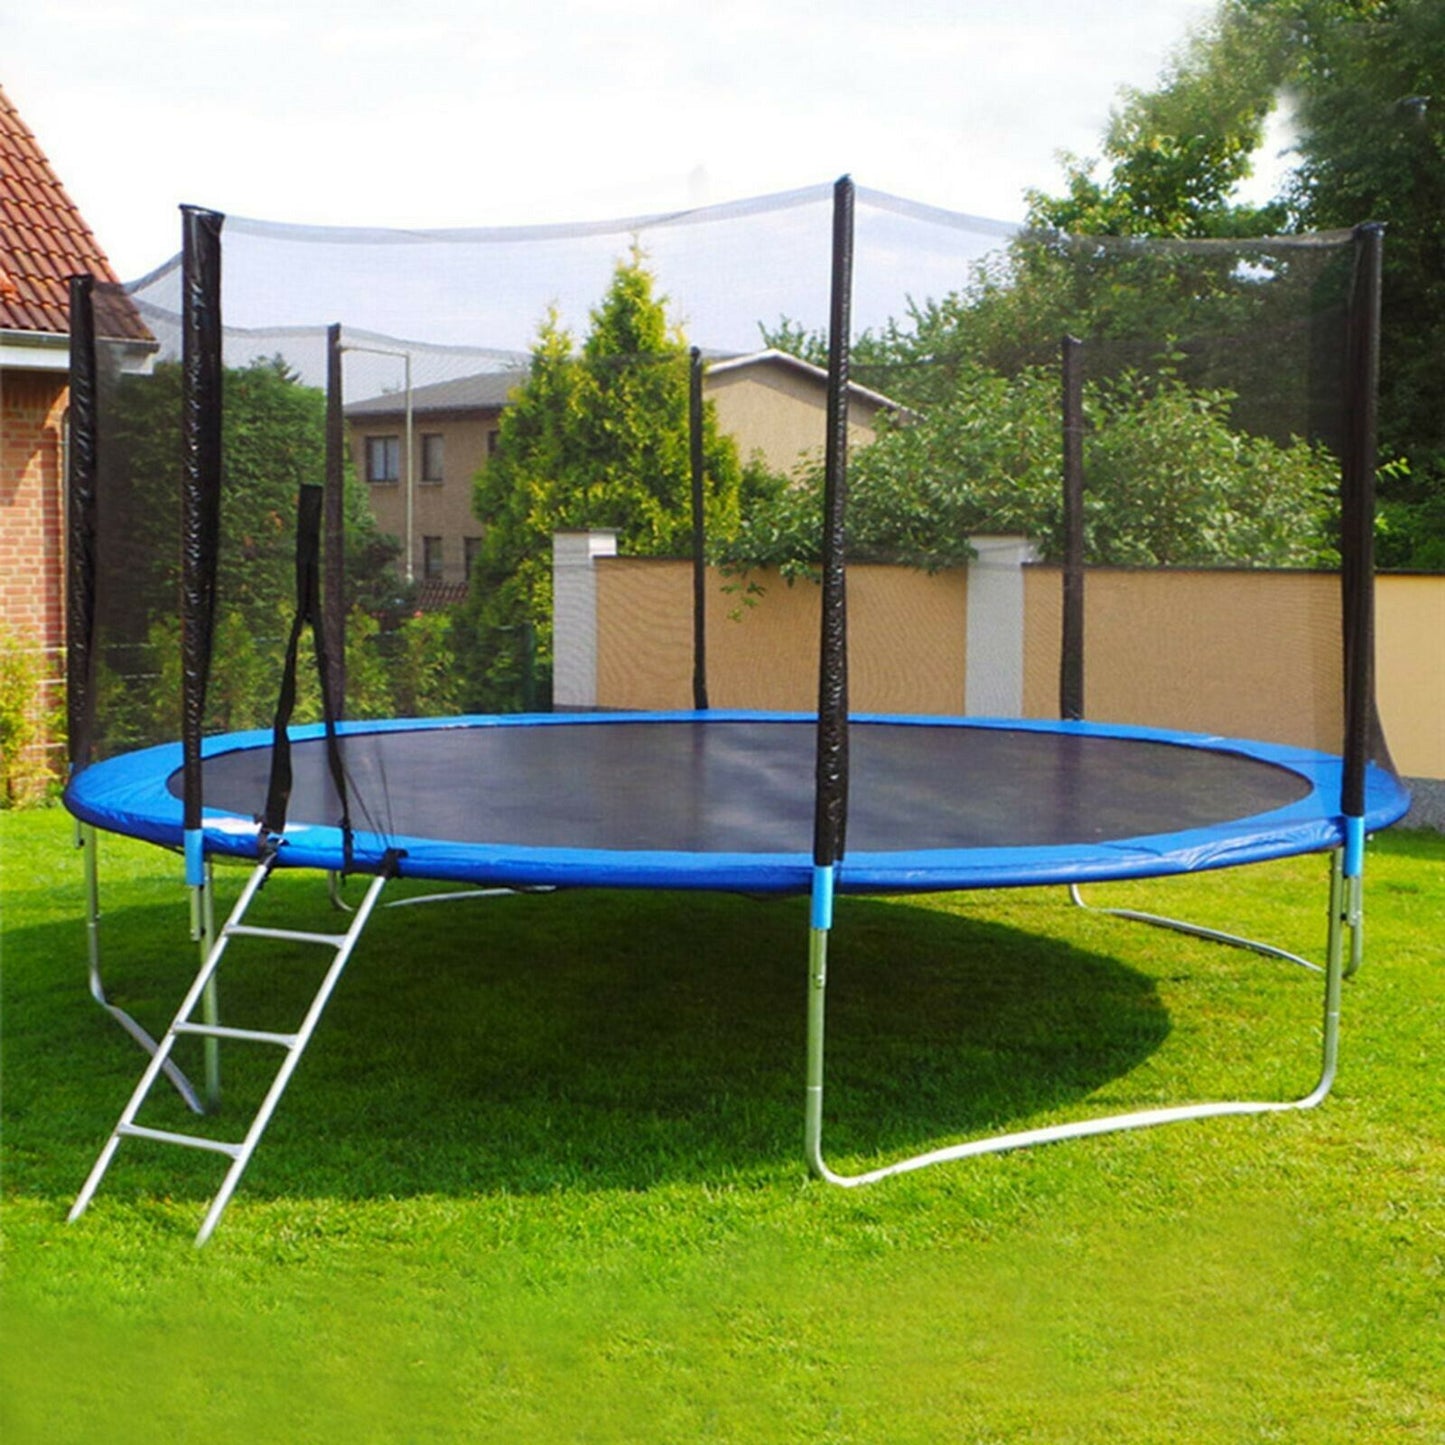 12 ft Kids Trampoline - Trampoline with Enclosure Net - Jumping Mat and Spring Cover Padding - KidsFriendly Trampoline